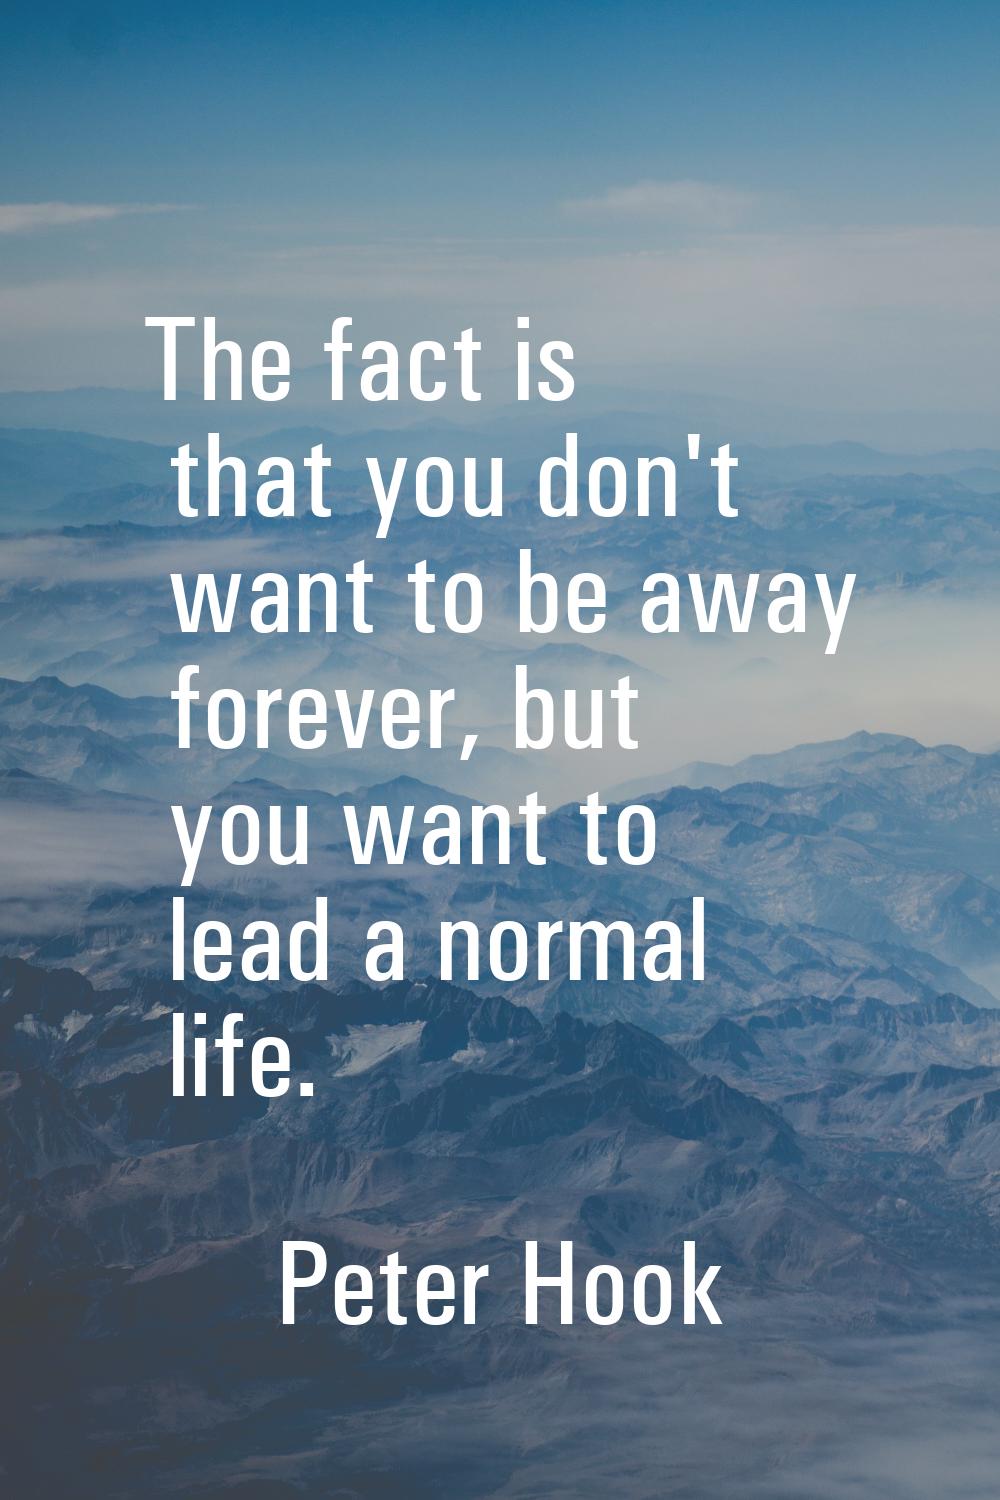 The fact is that you don't want to be away forever, but you want to lead a normal life.